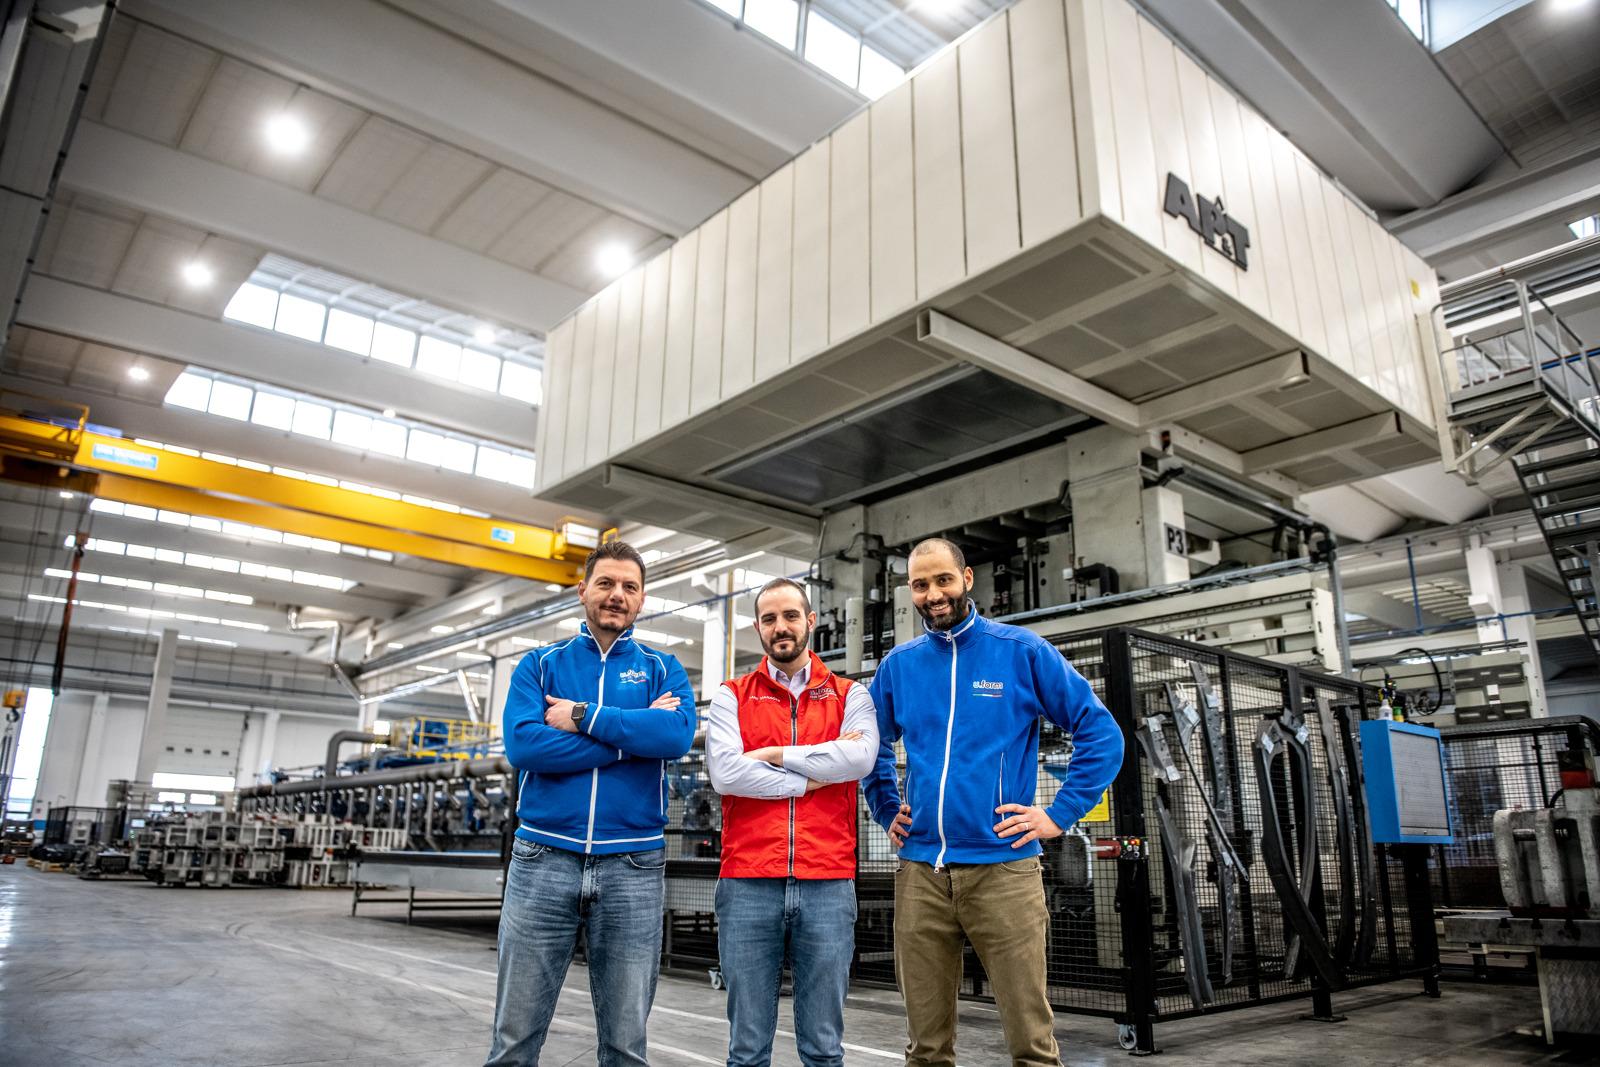 U.form is looking forward to receiving yet another press-hardening line from AP&T – the seventh in a row. From the left, Sergio Piersanti, Project Manager, Paolo Montefiore, Plant Manager and Rachouan Hassine, Quality Manager at U.form’s facility in Castellalto, Italy. Photograph: U.form